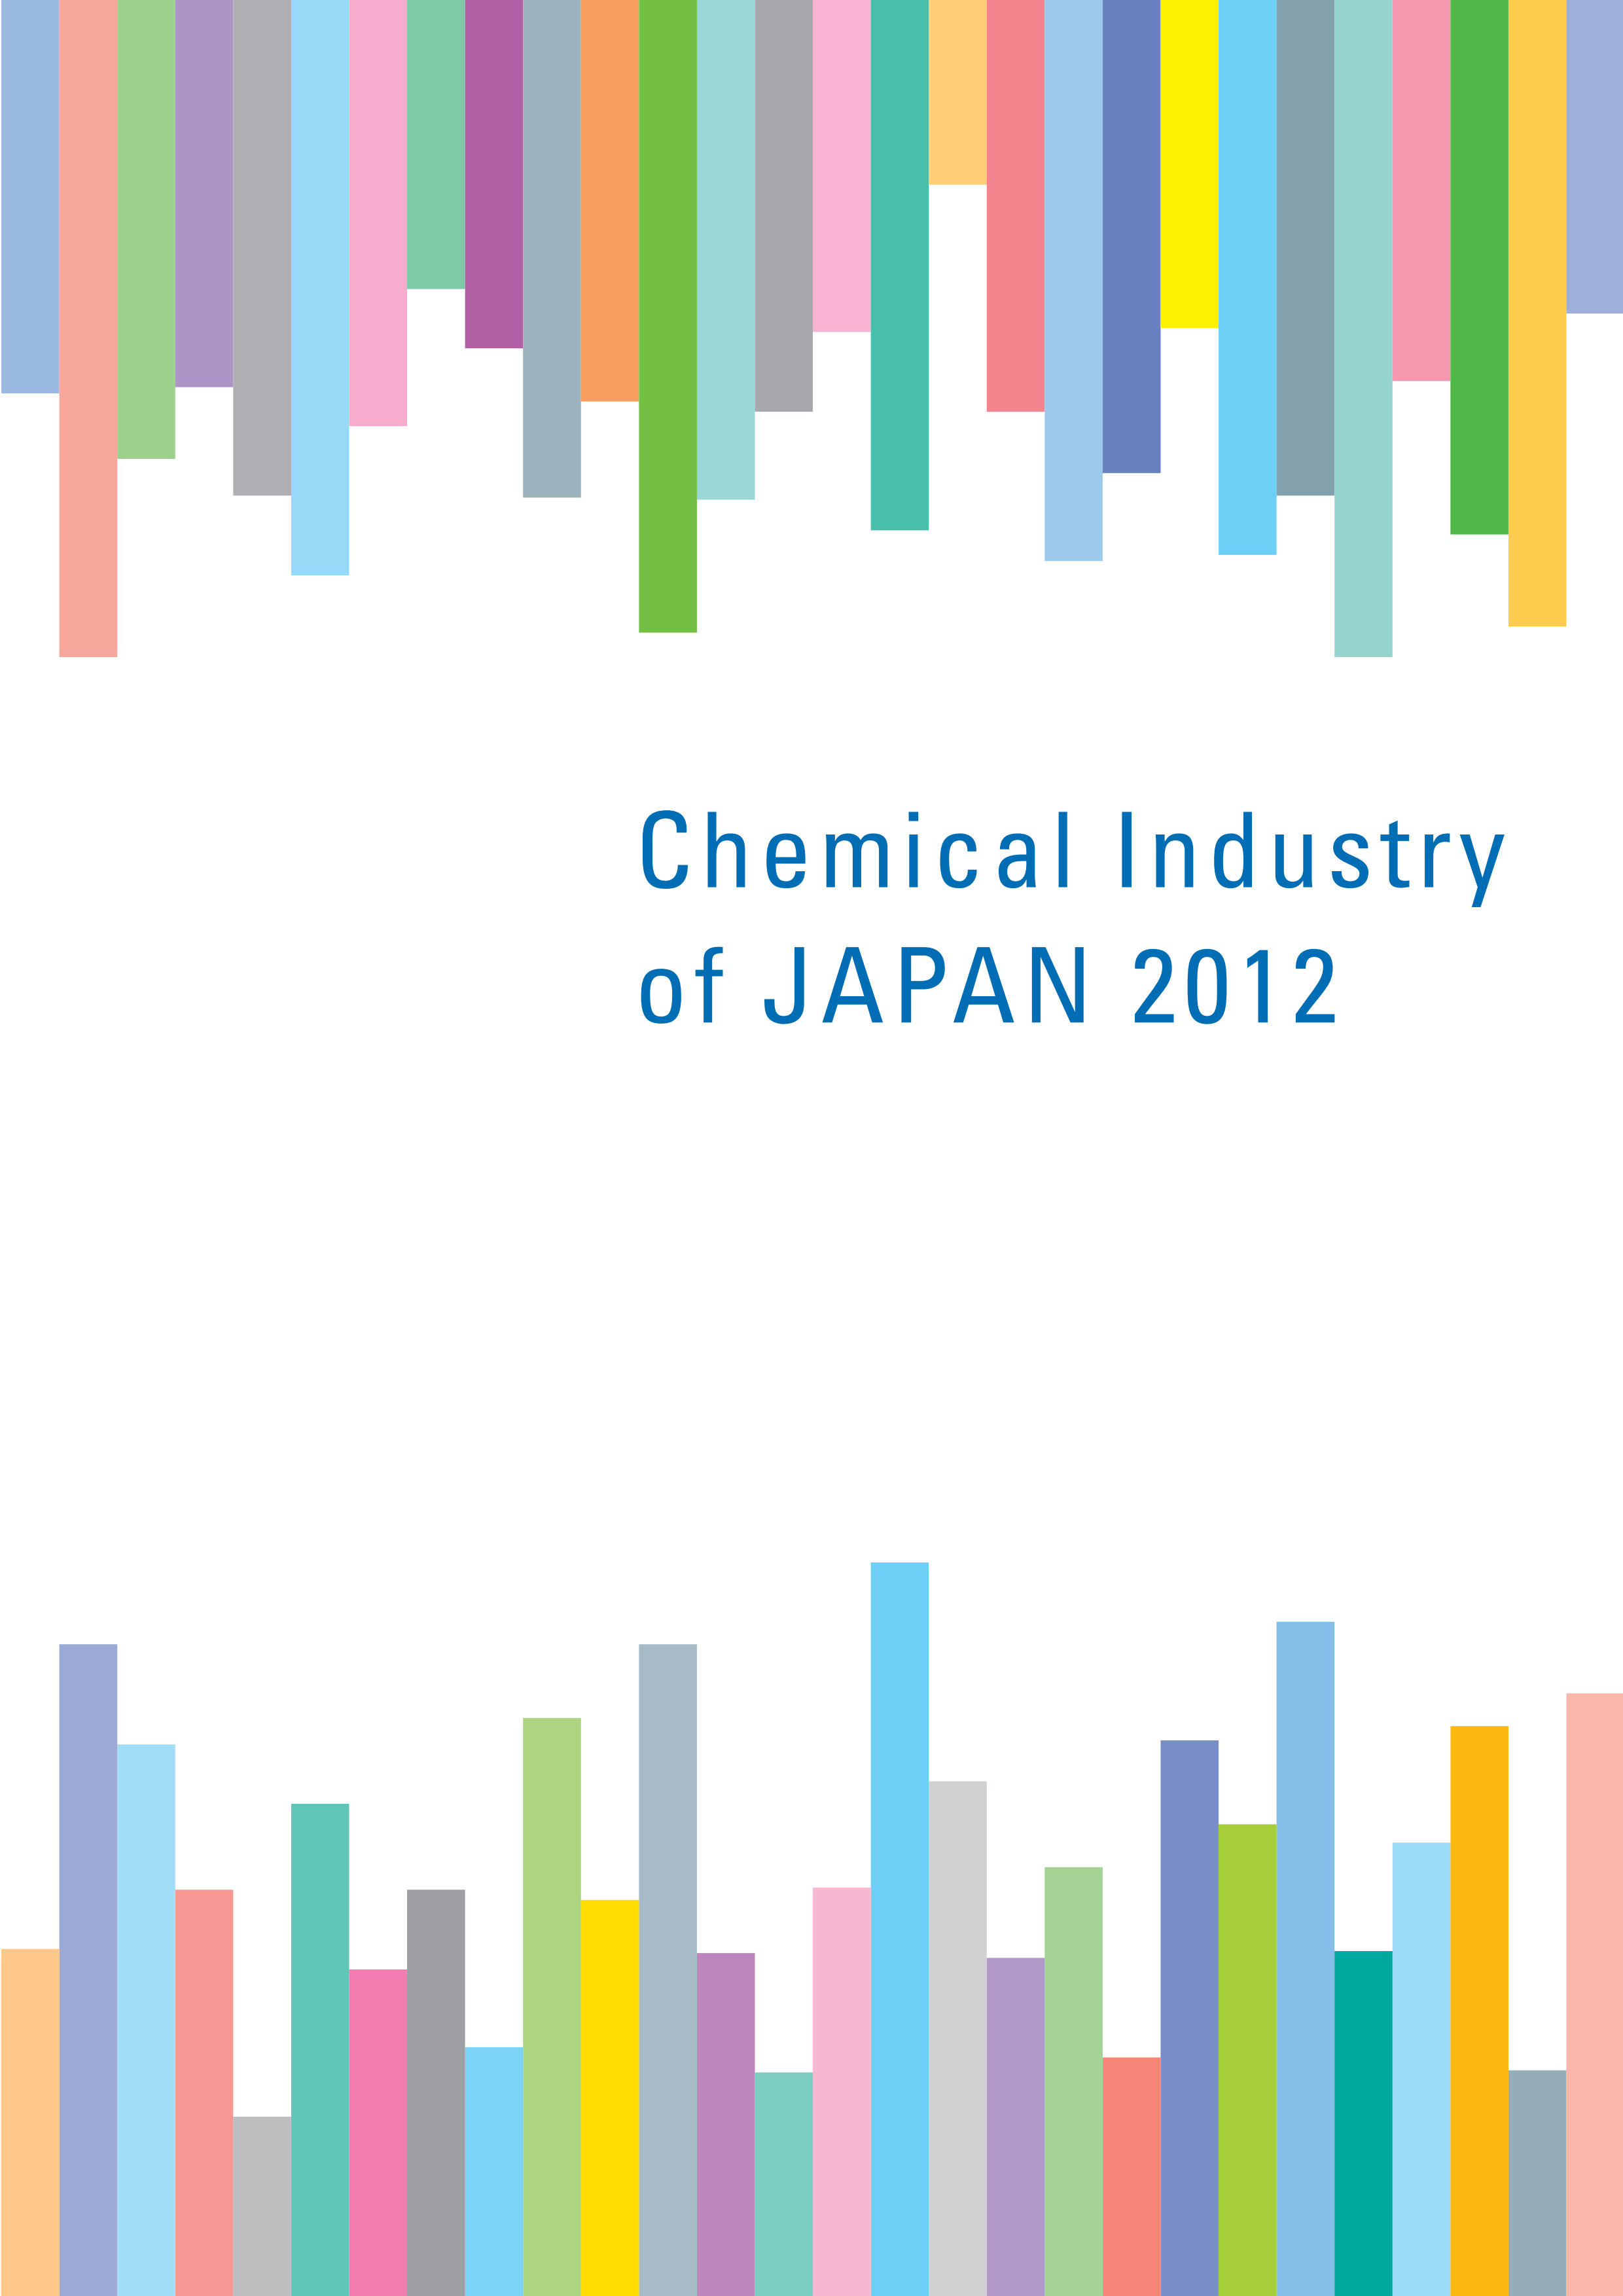 2012 CHEMICAL INDUSTRY OF JAPAN IN GRAPHS